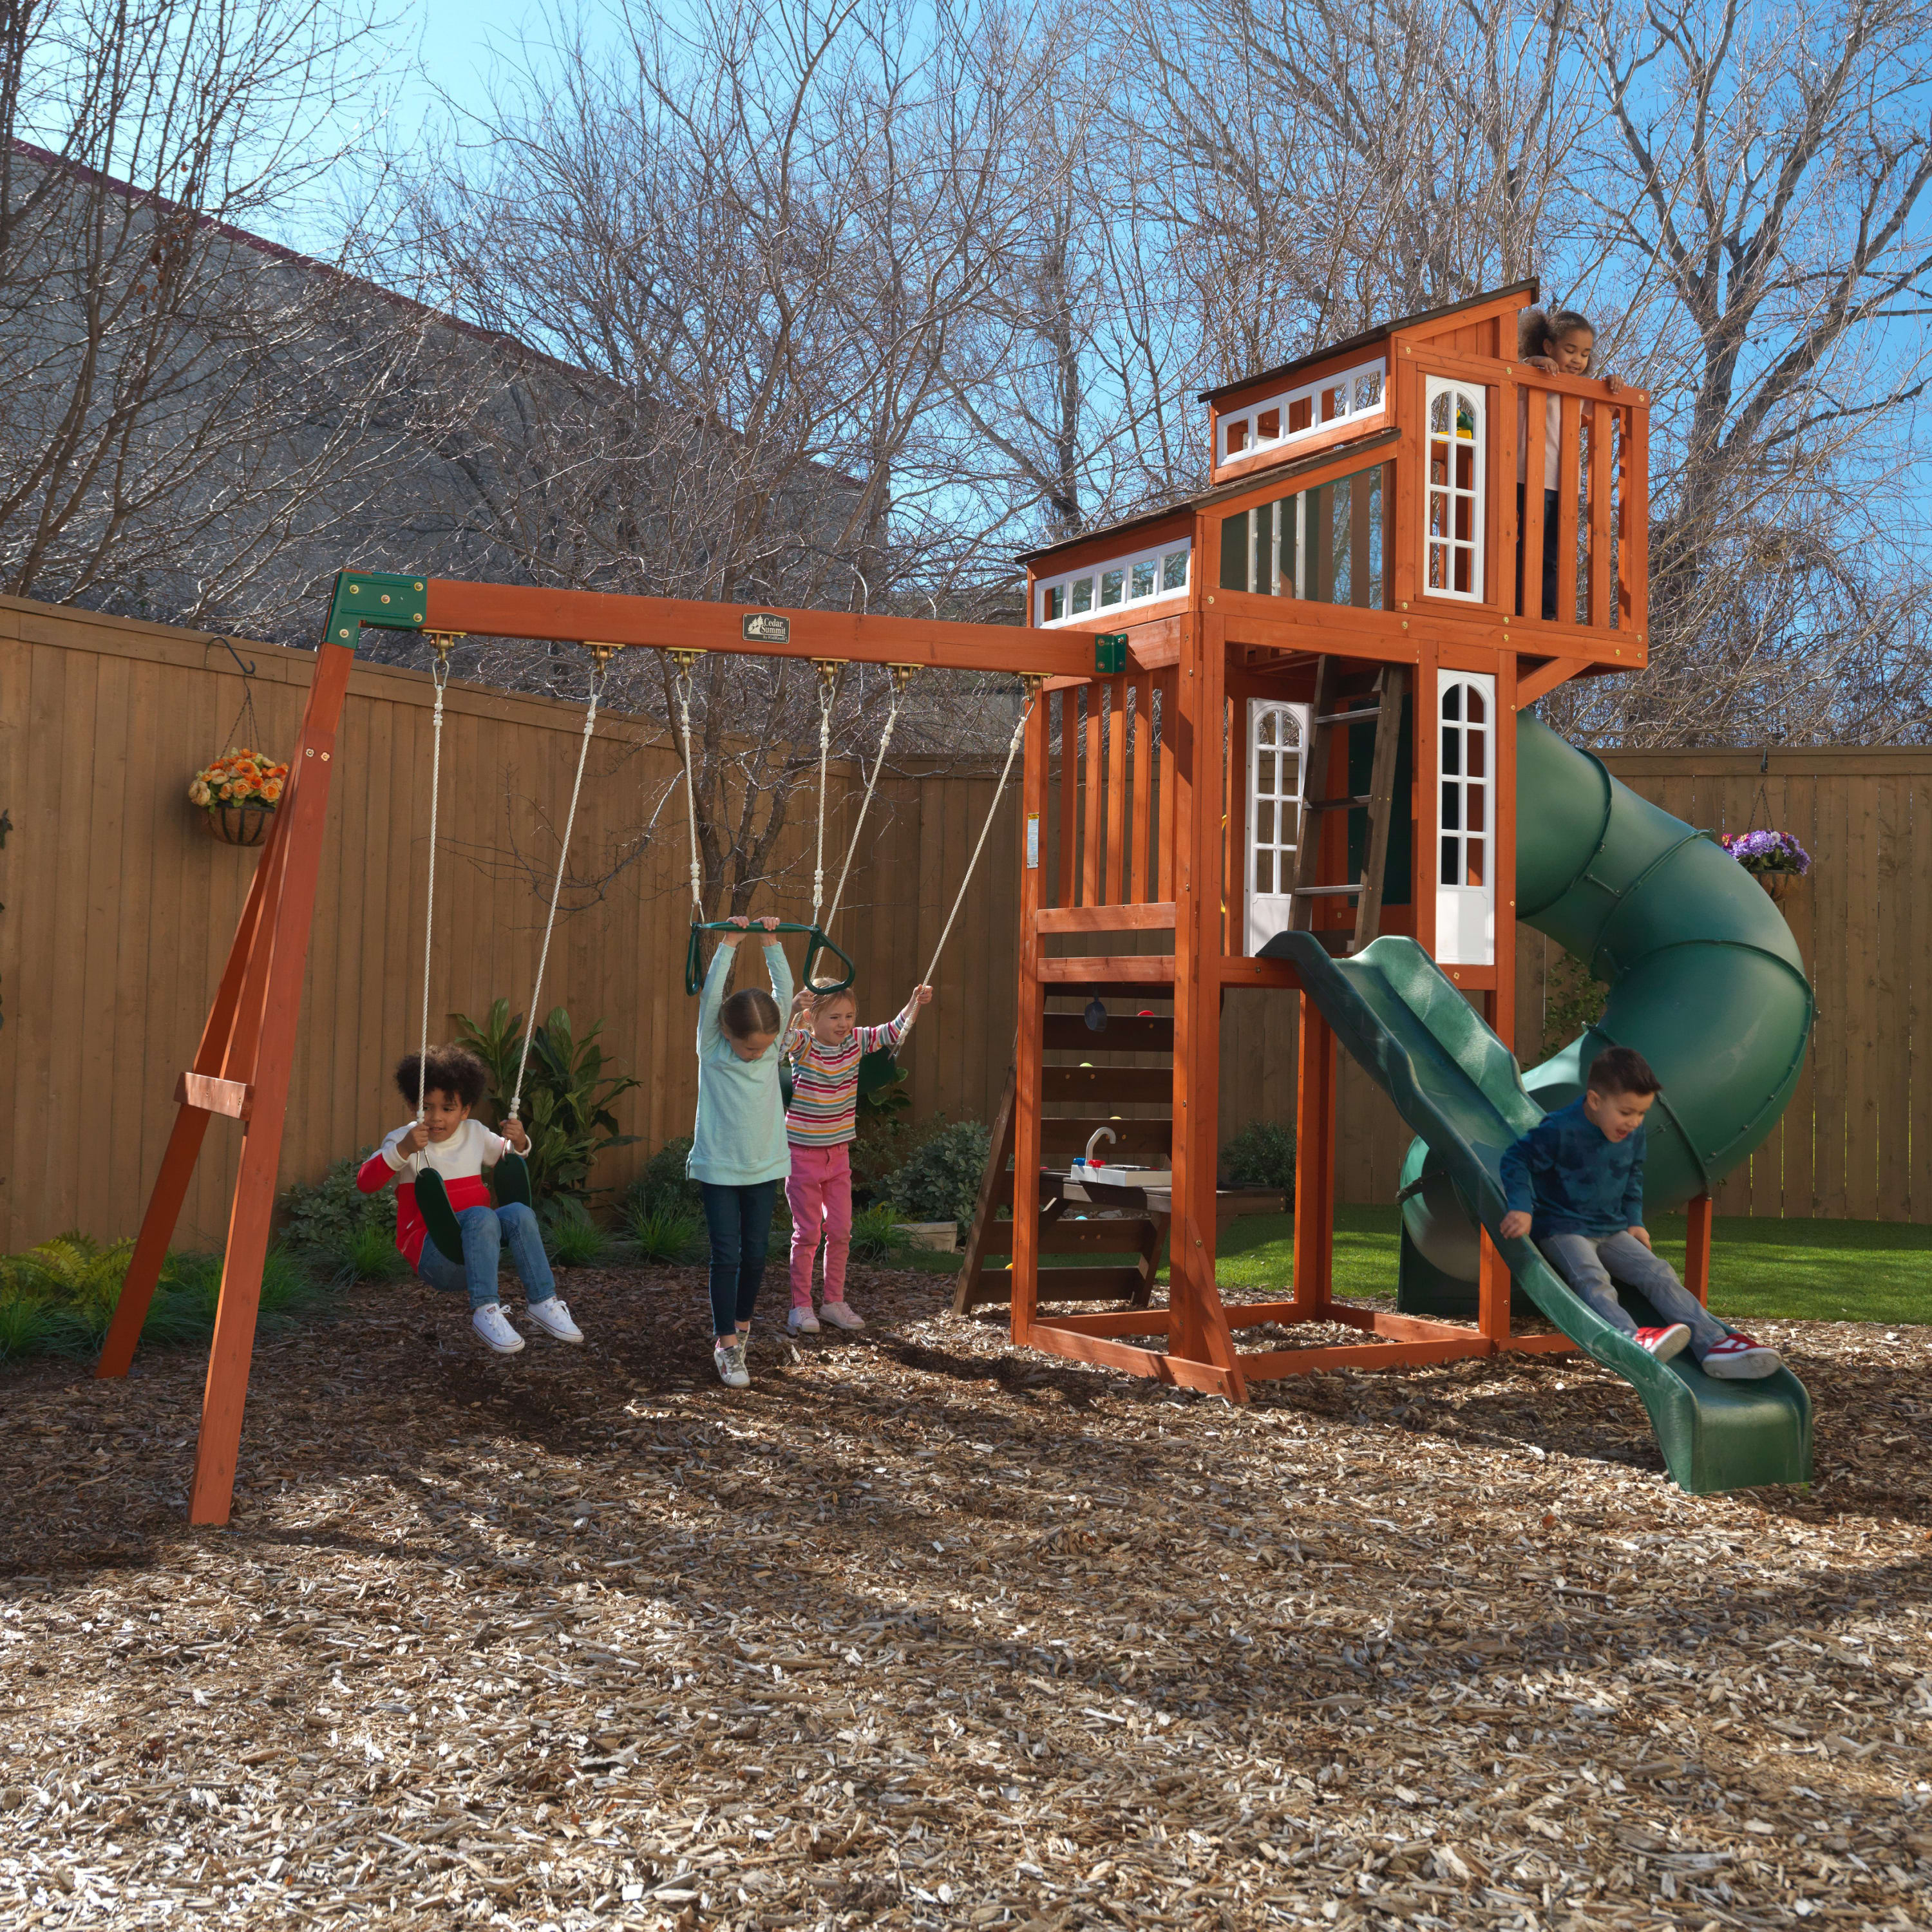 KidKraft Austin Wooden Outdoor Swing Set with Slides, Swings, Kitchen and Rock Wall - image 3 of 27